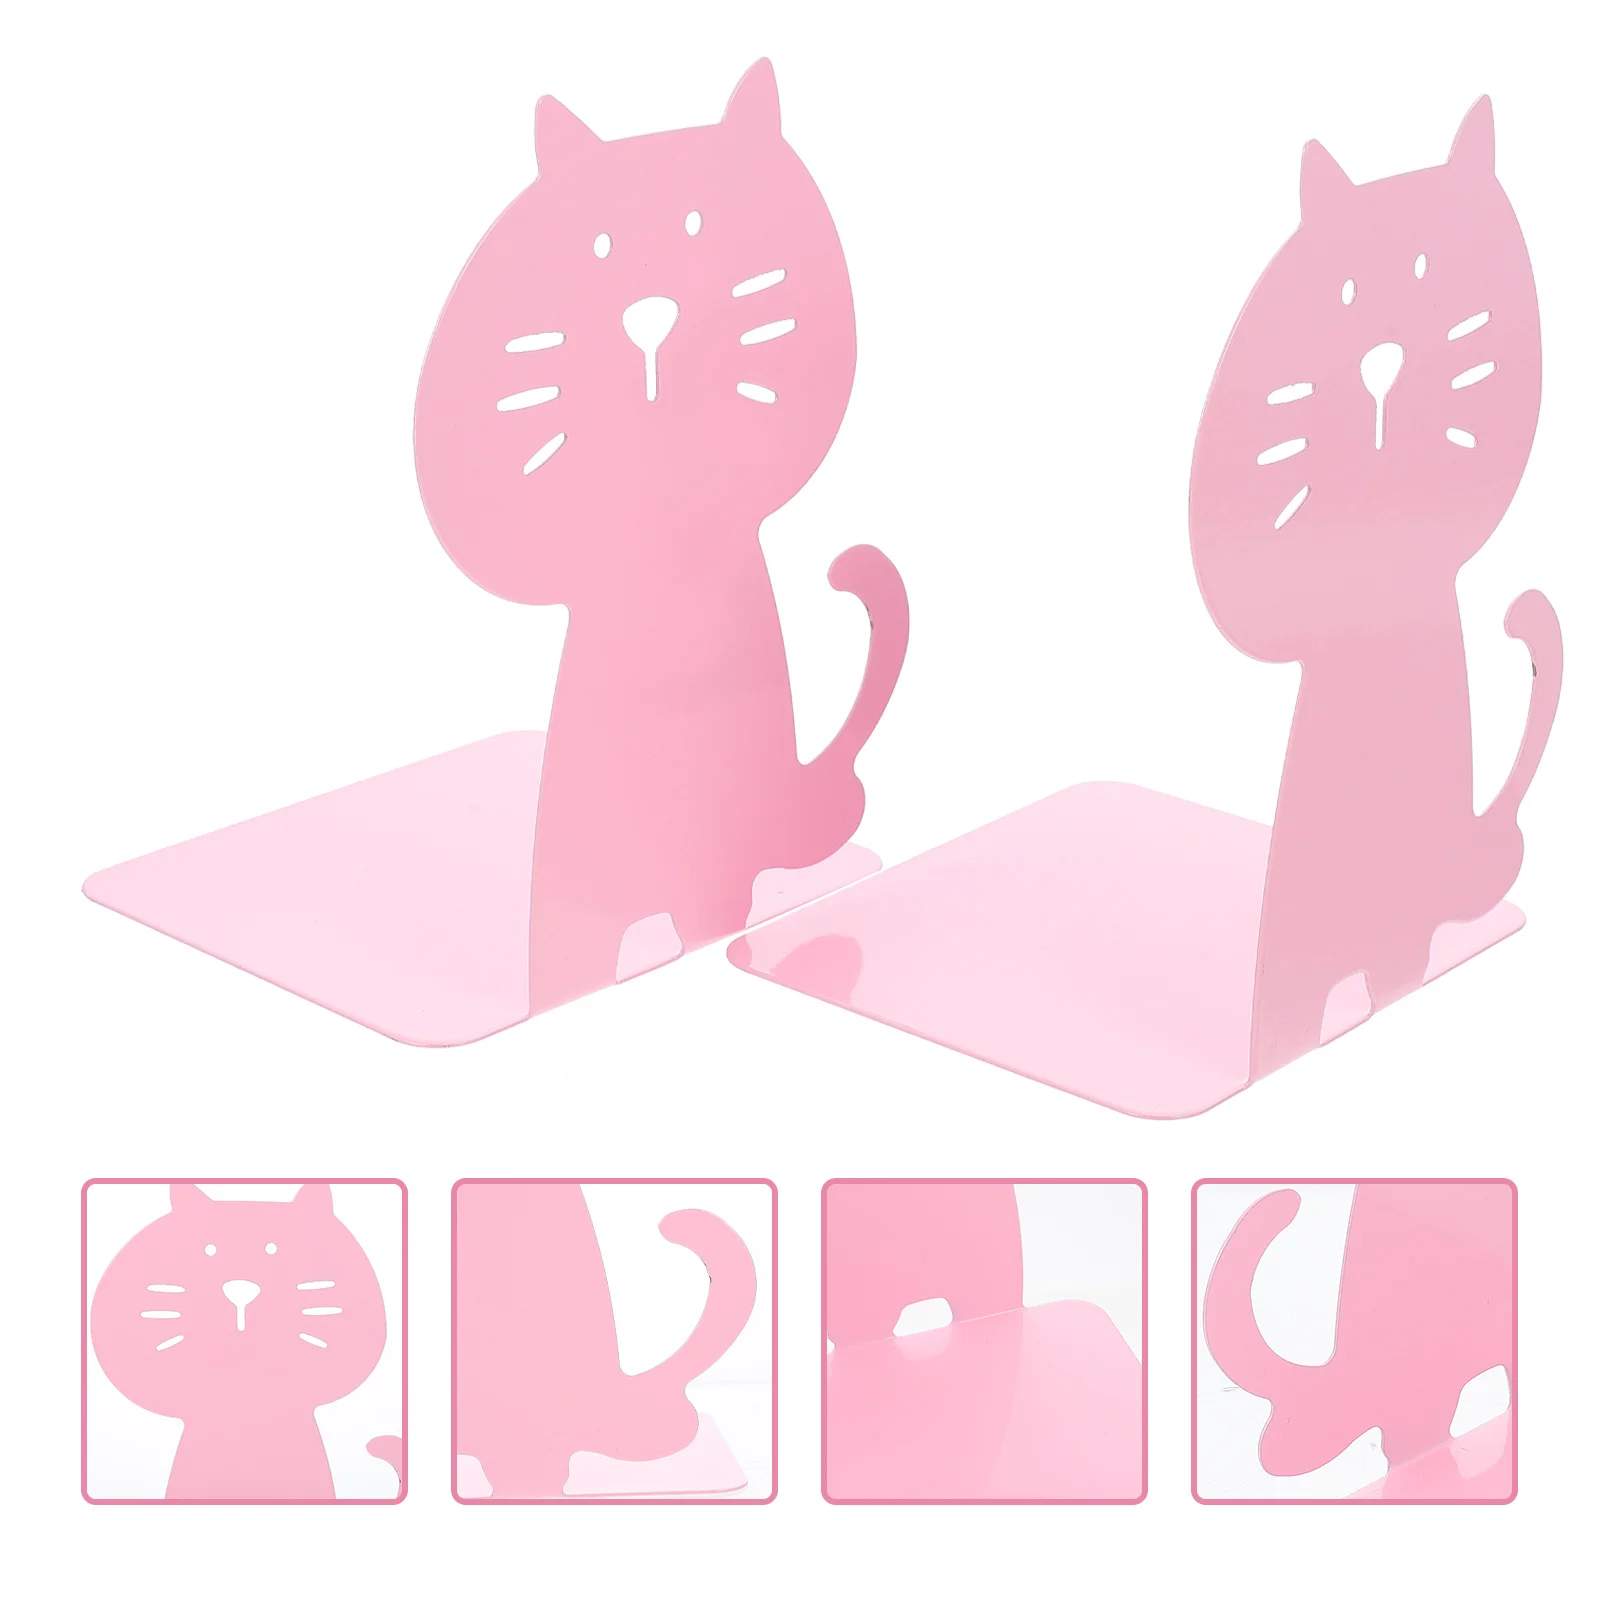 2Pcs Cat Iron Book Ends Metal Book Stoppers Student Desktop Bookends Desktop Book Organizers Lovely Cat Bookends for Home